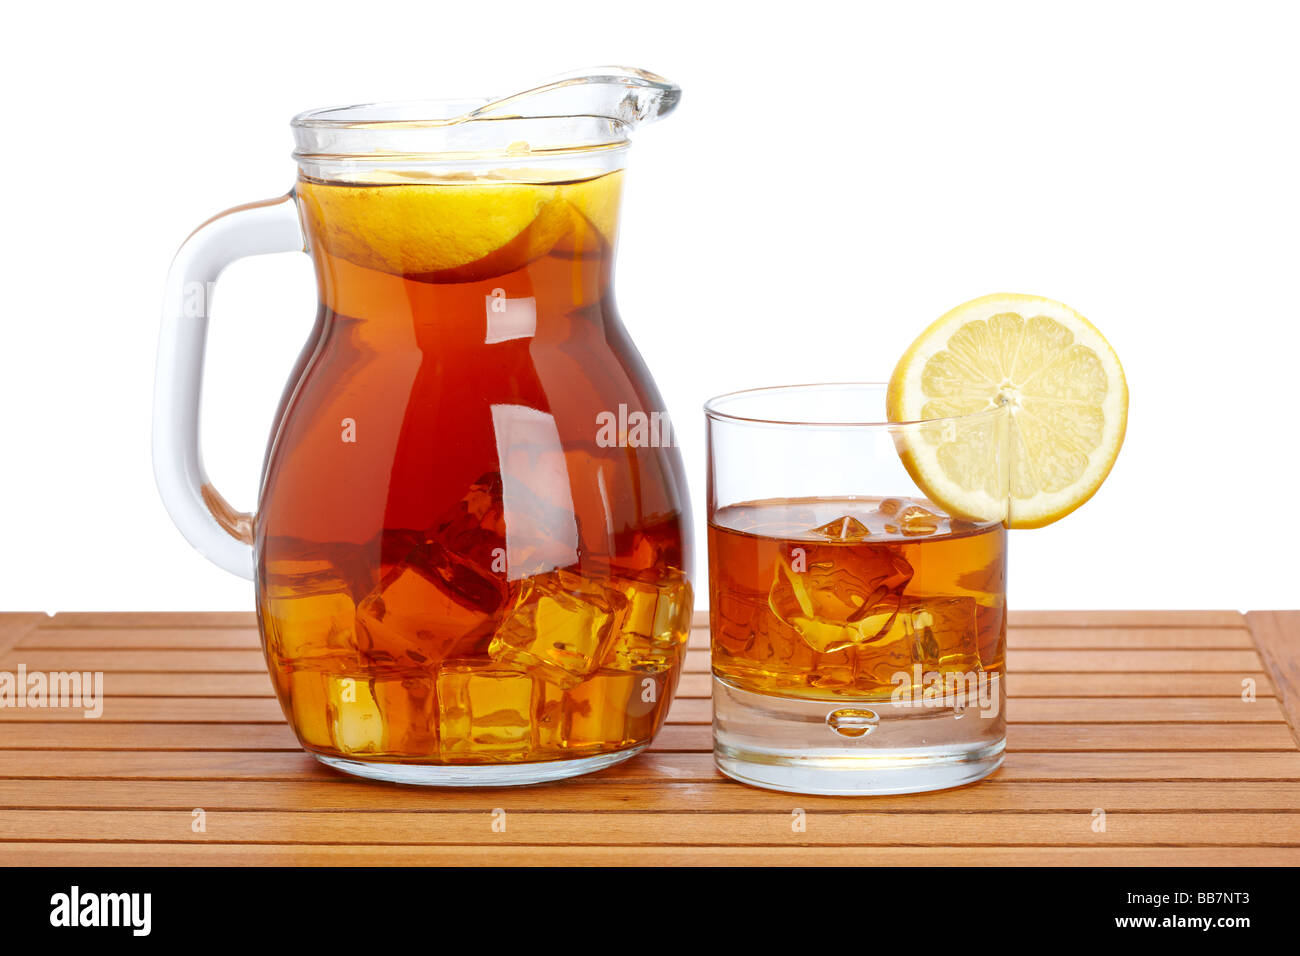 Ice tea pitcher and glasss with lemon and icecubes on wooden background Shallow depth of field Stock Photo